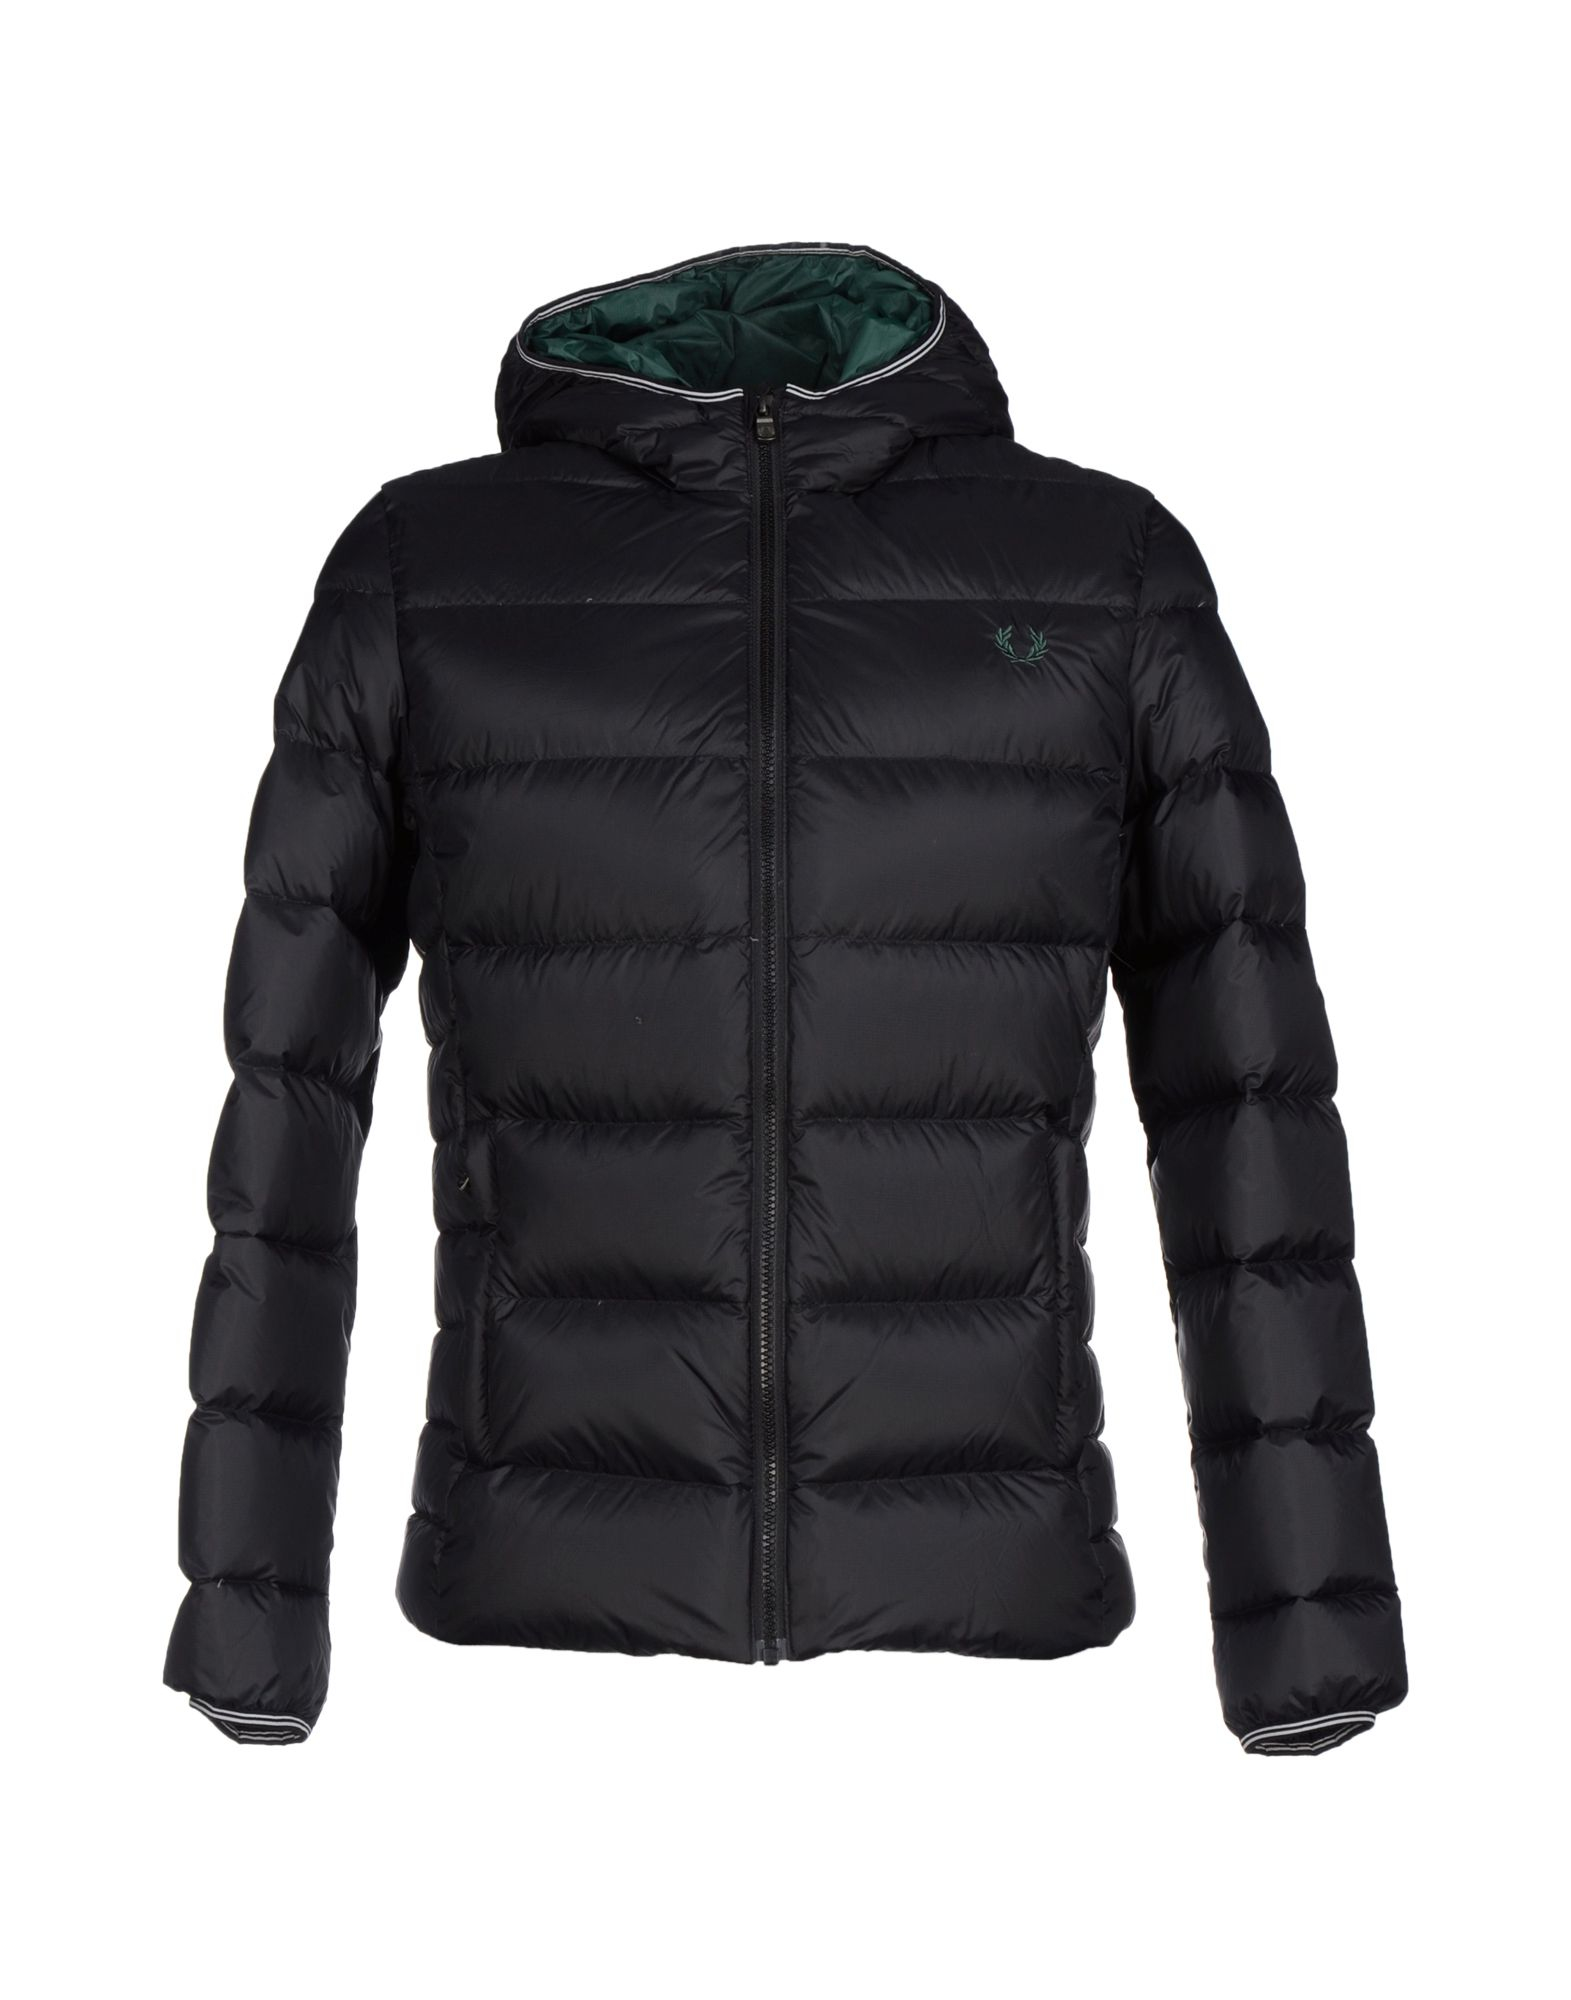 Fred Perry Down Jacket Flash Sales - benim.k12.tr 1688053261